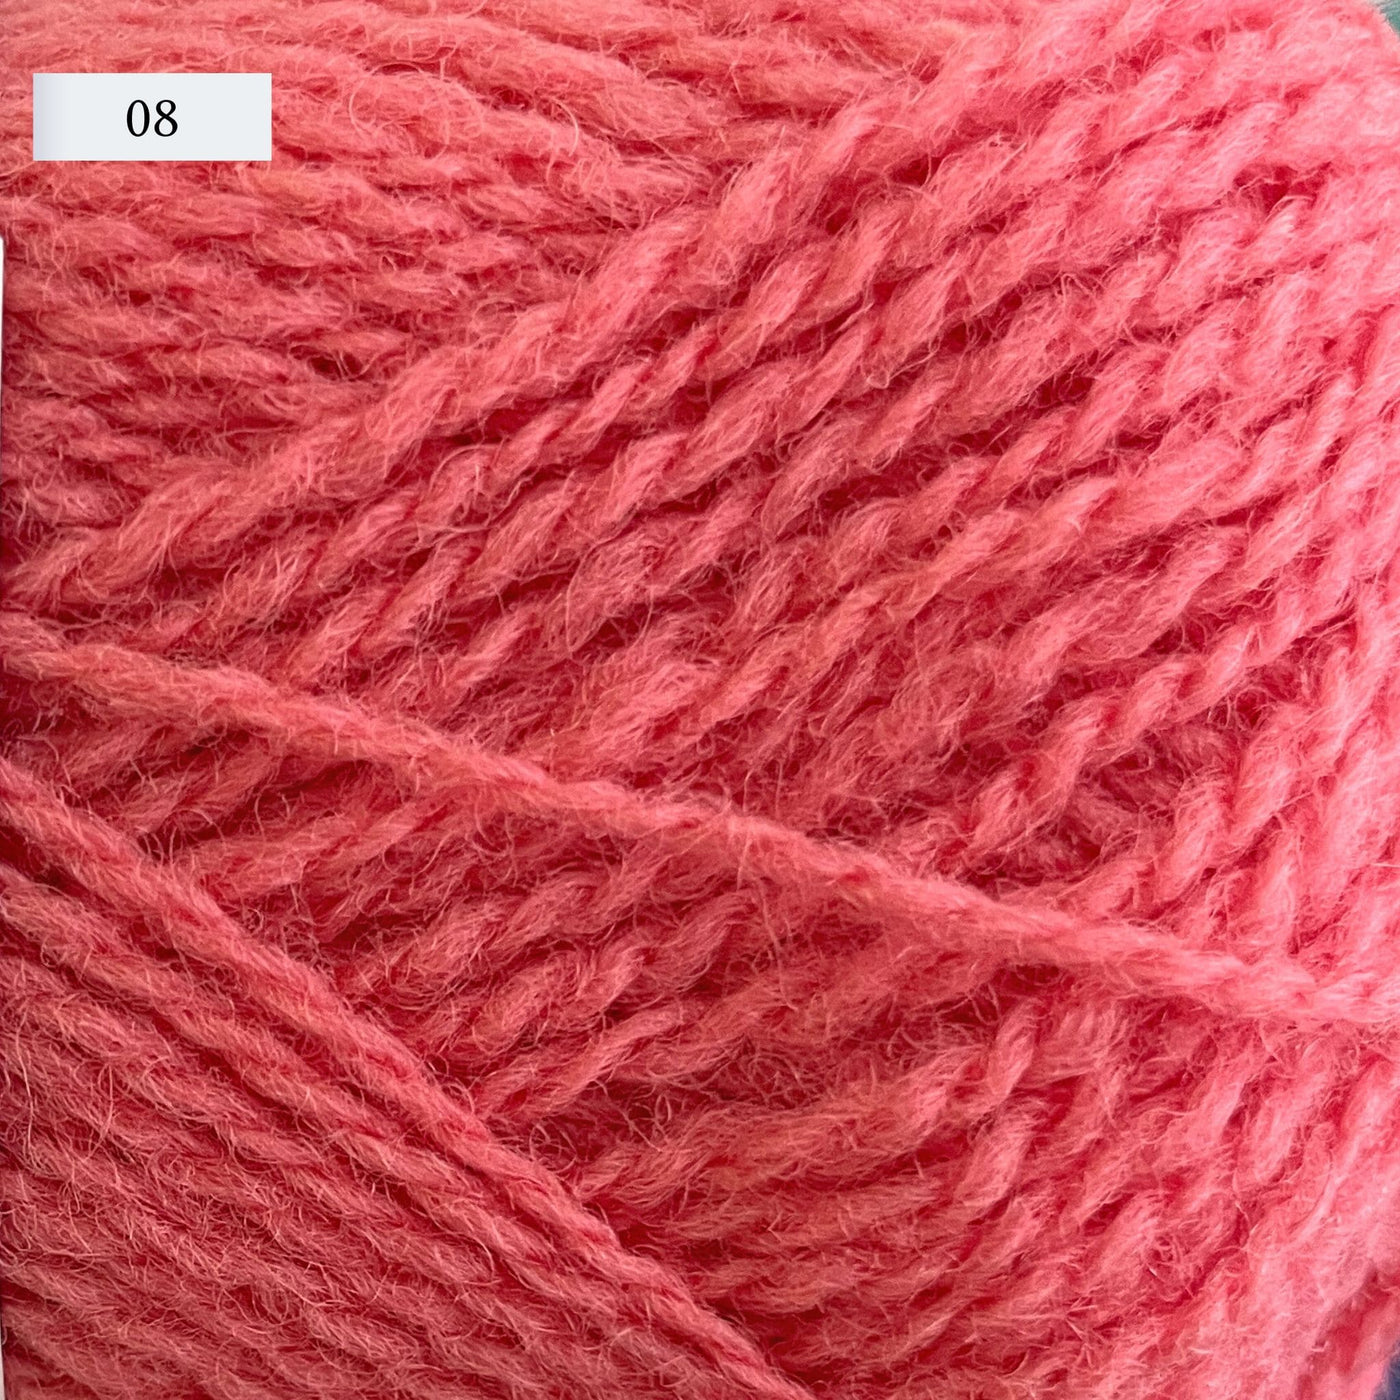 Jamieson & Smith 2ply Jumper Weight, light fingering weight yarn, in color 08, a hot salmon pink